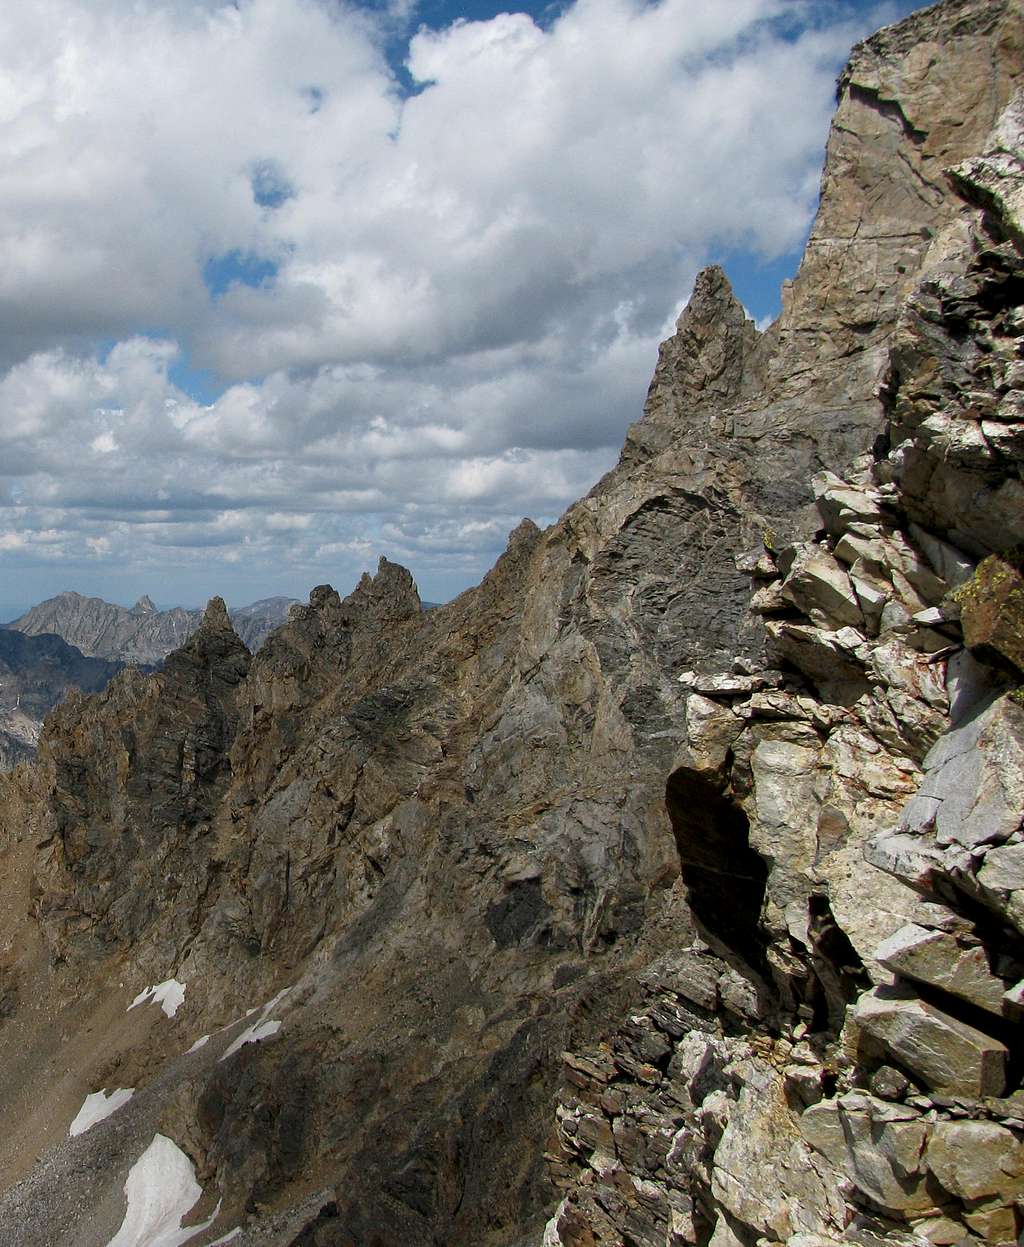 West face of Middle Teton